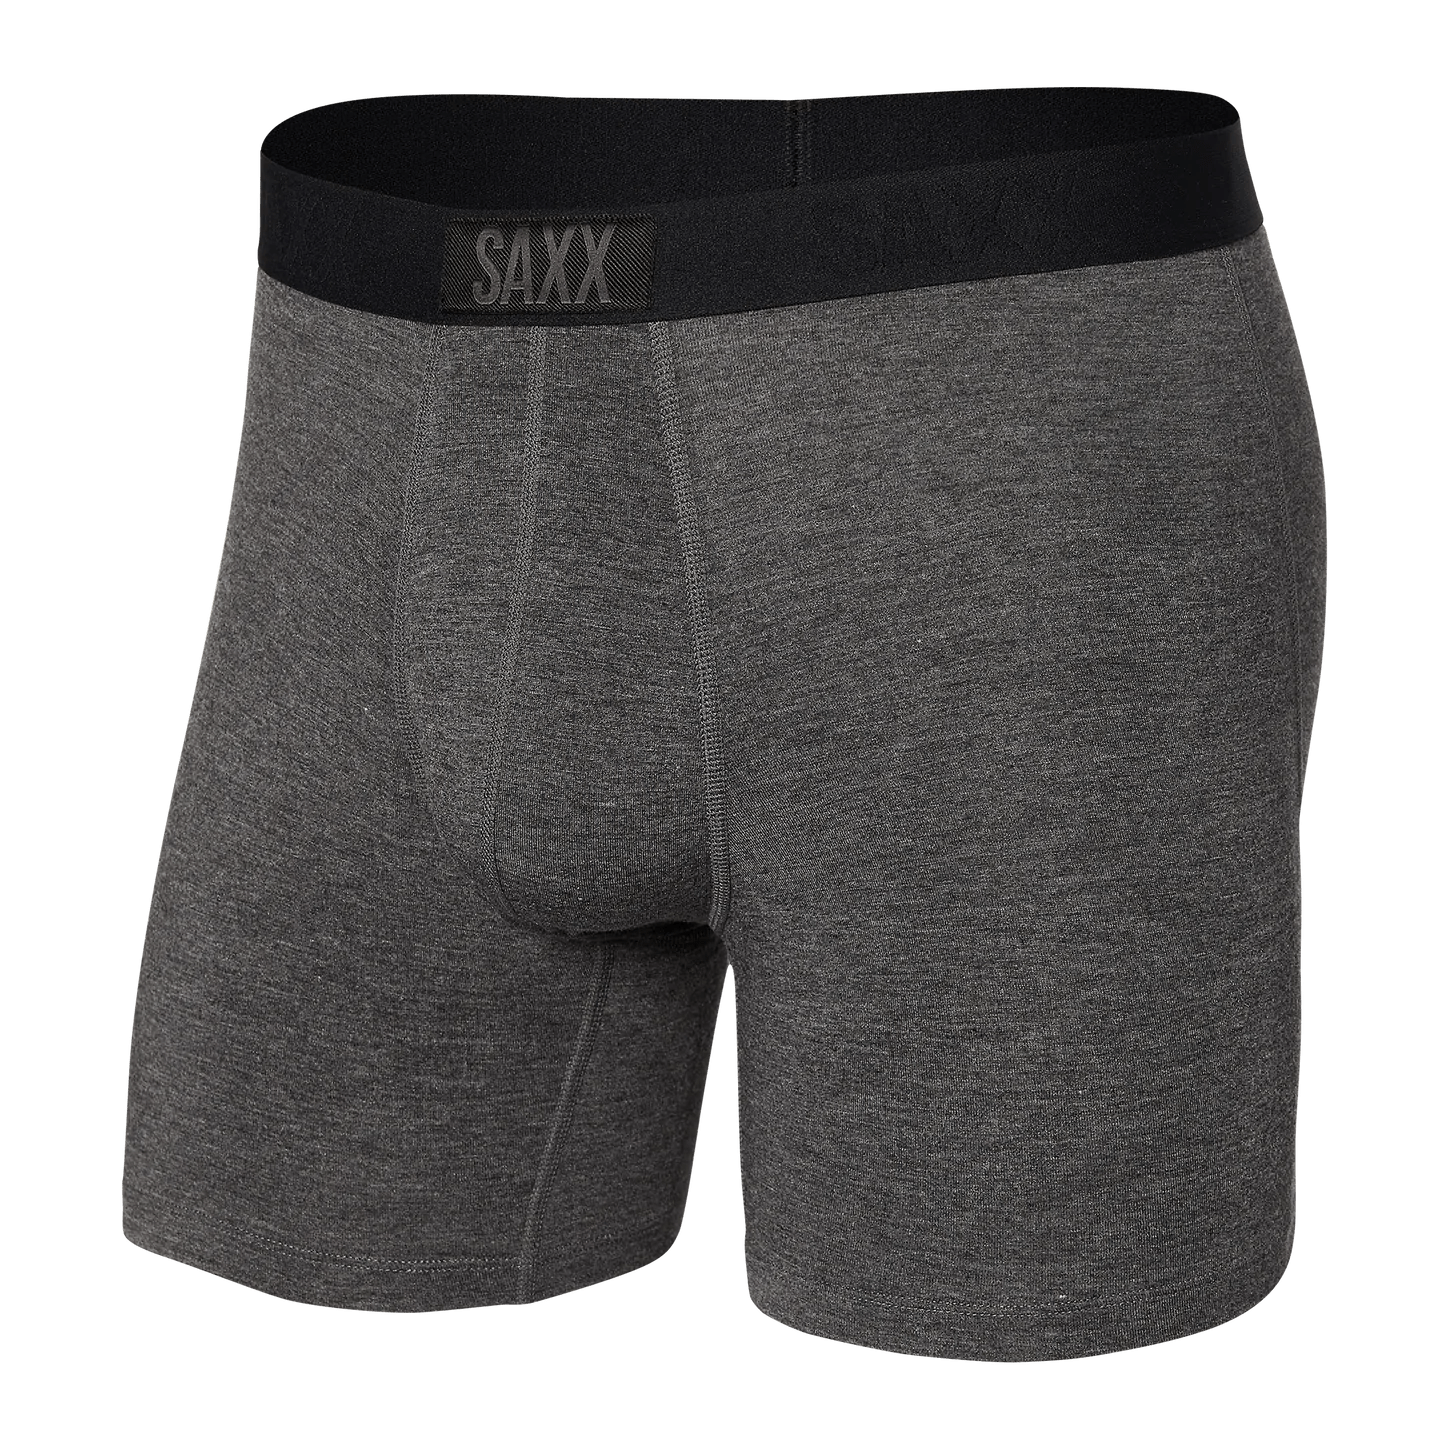 SAXX Ultra Boxer Briefs Relaxed Fit - SXBB30F - Assorted Styles